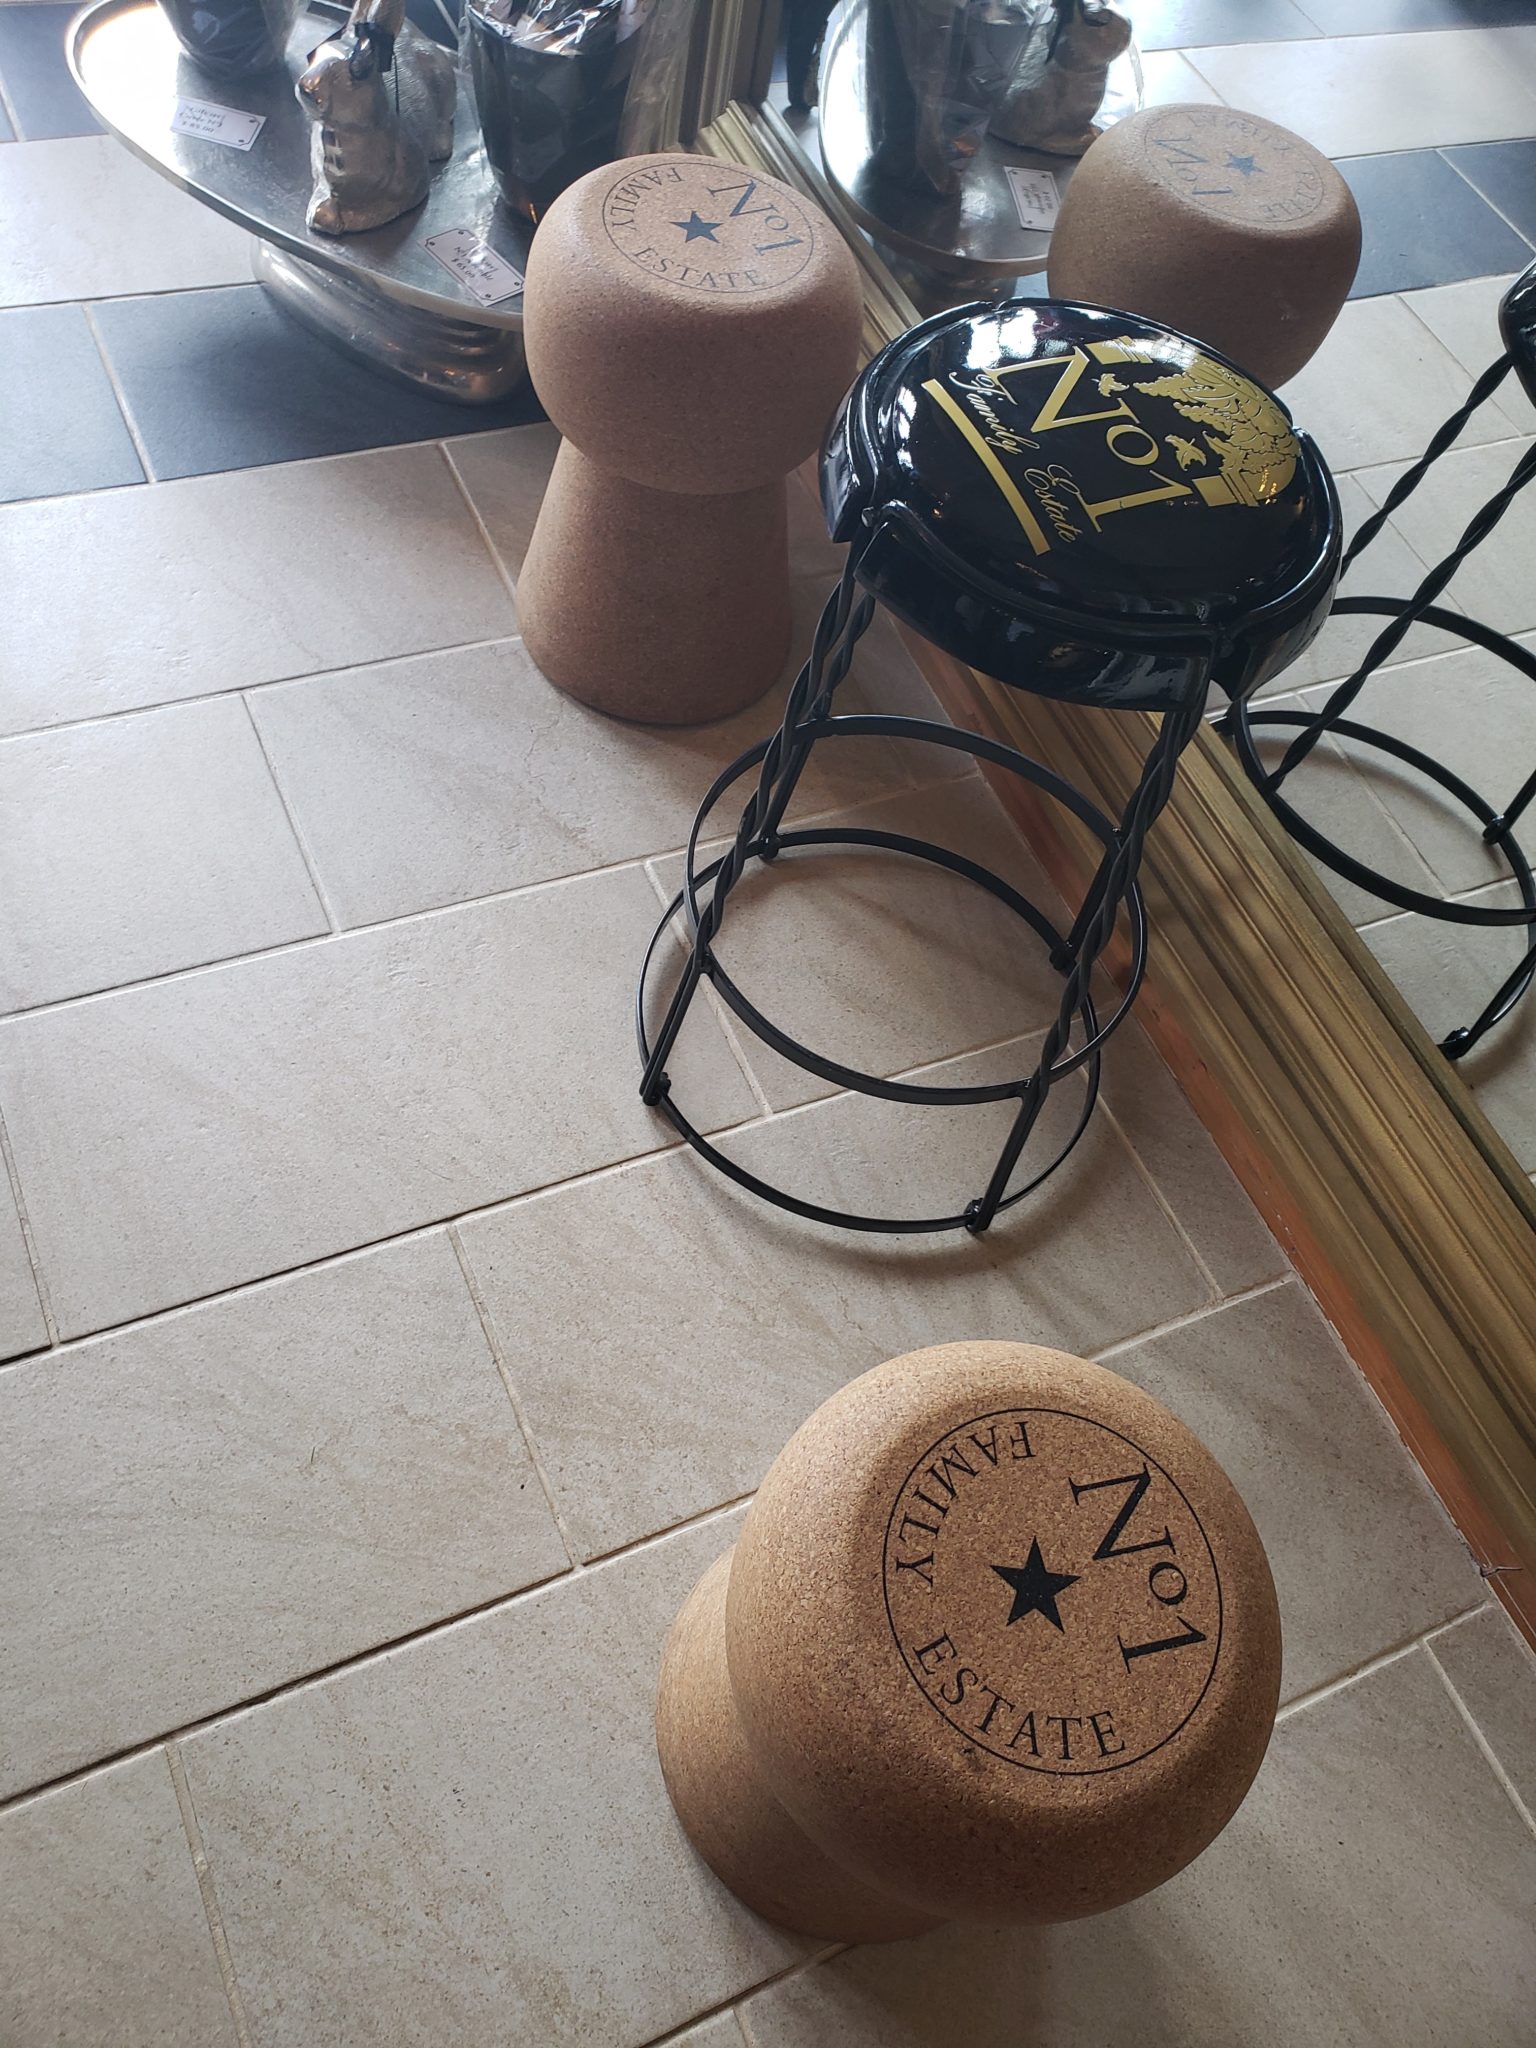 a group of stools on a tile floor